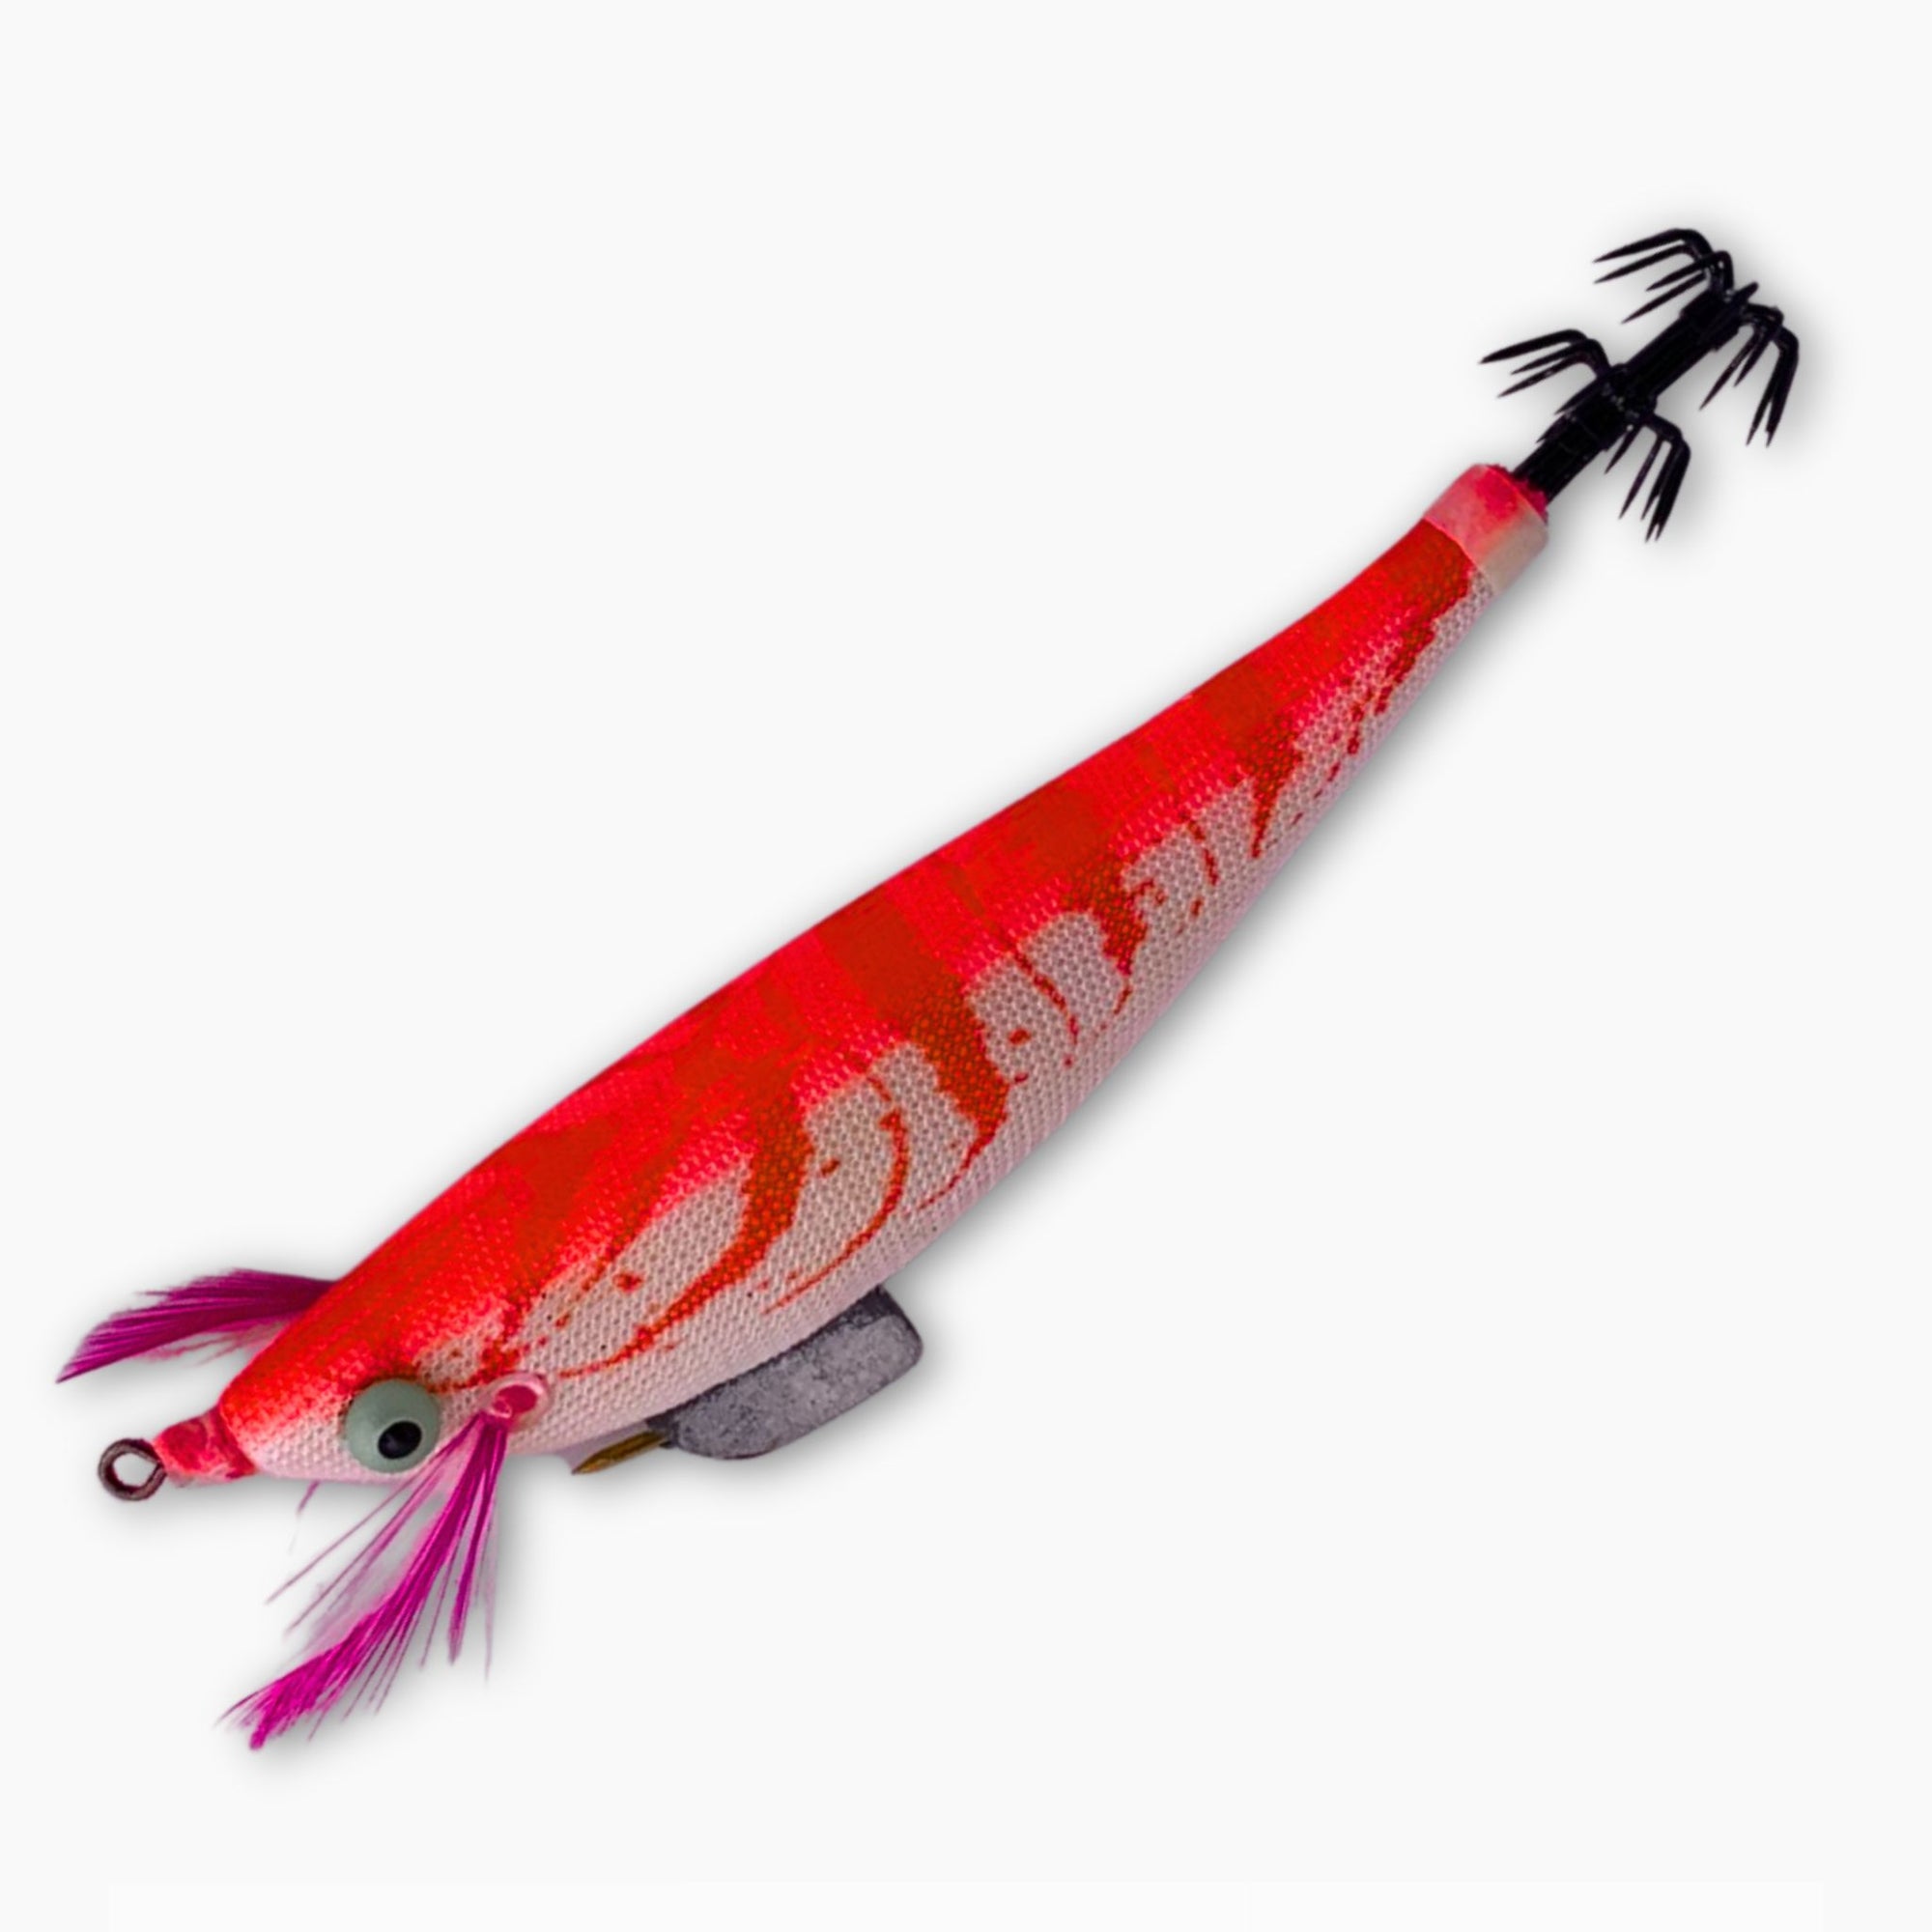 Squid Jig Size 2.0# - South East Clearance Centre